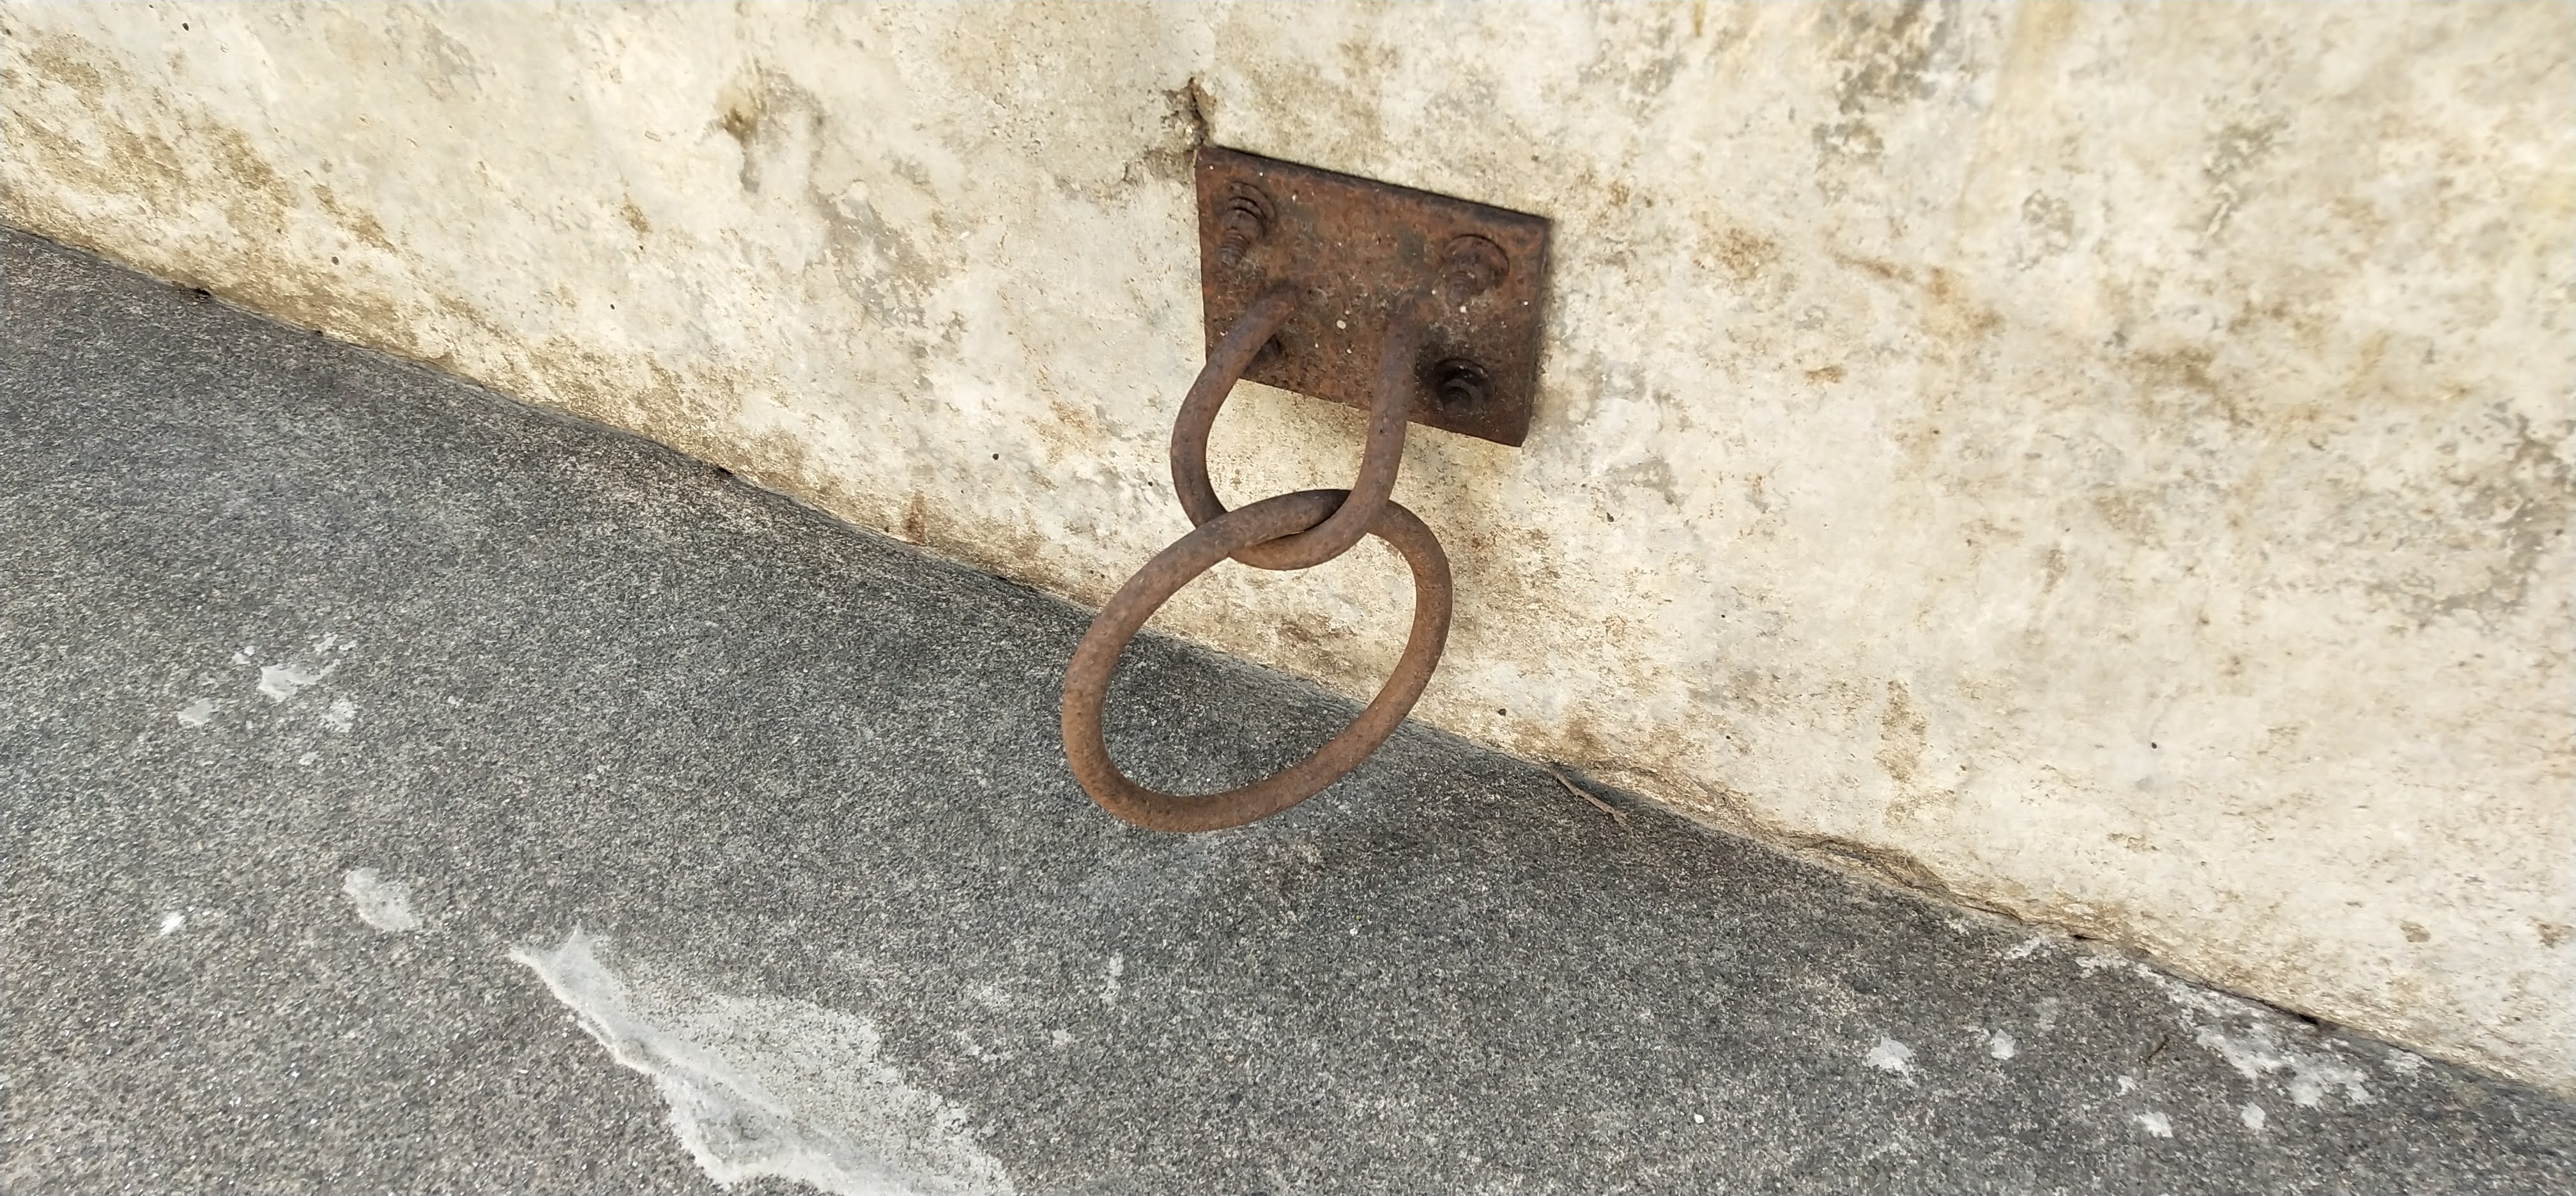 The metal ring for securing the cattle